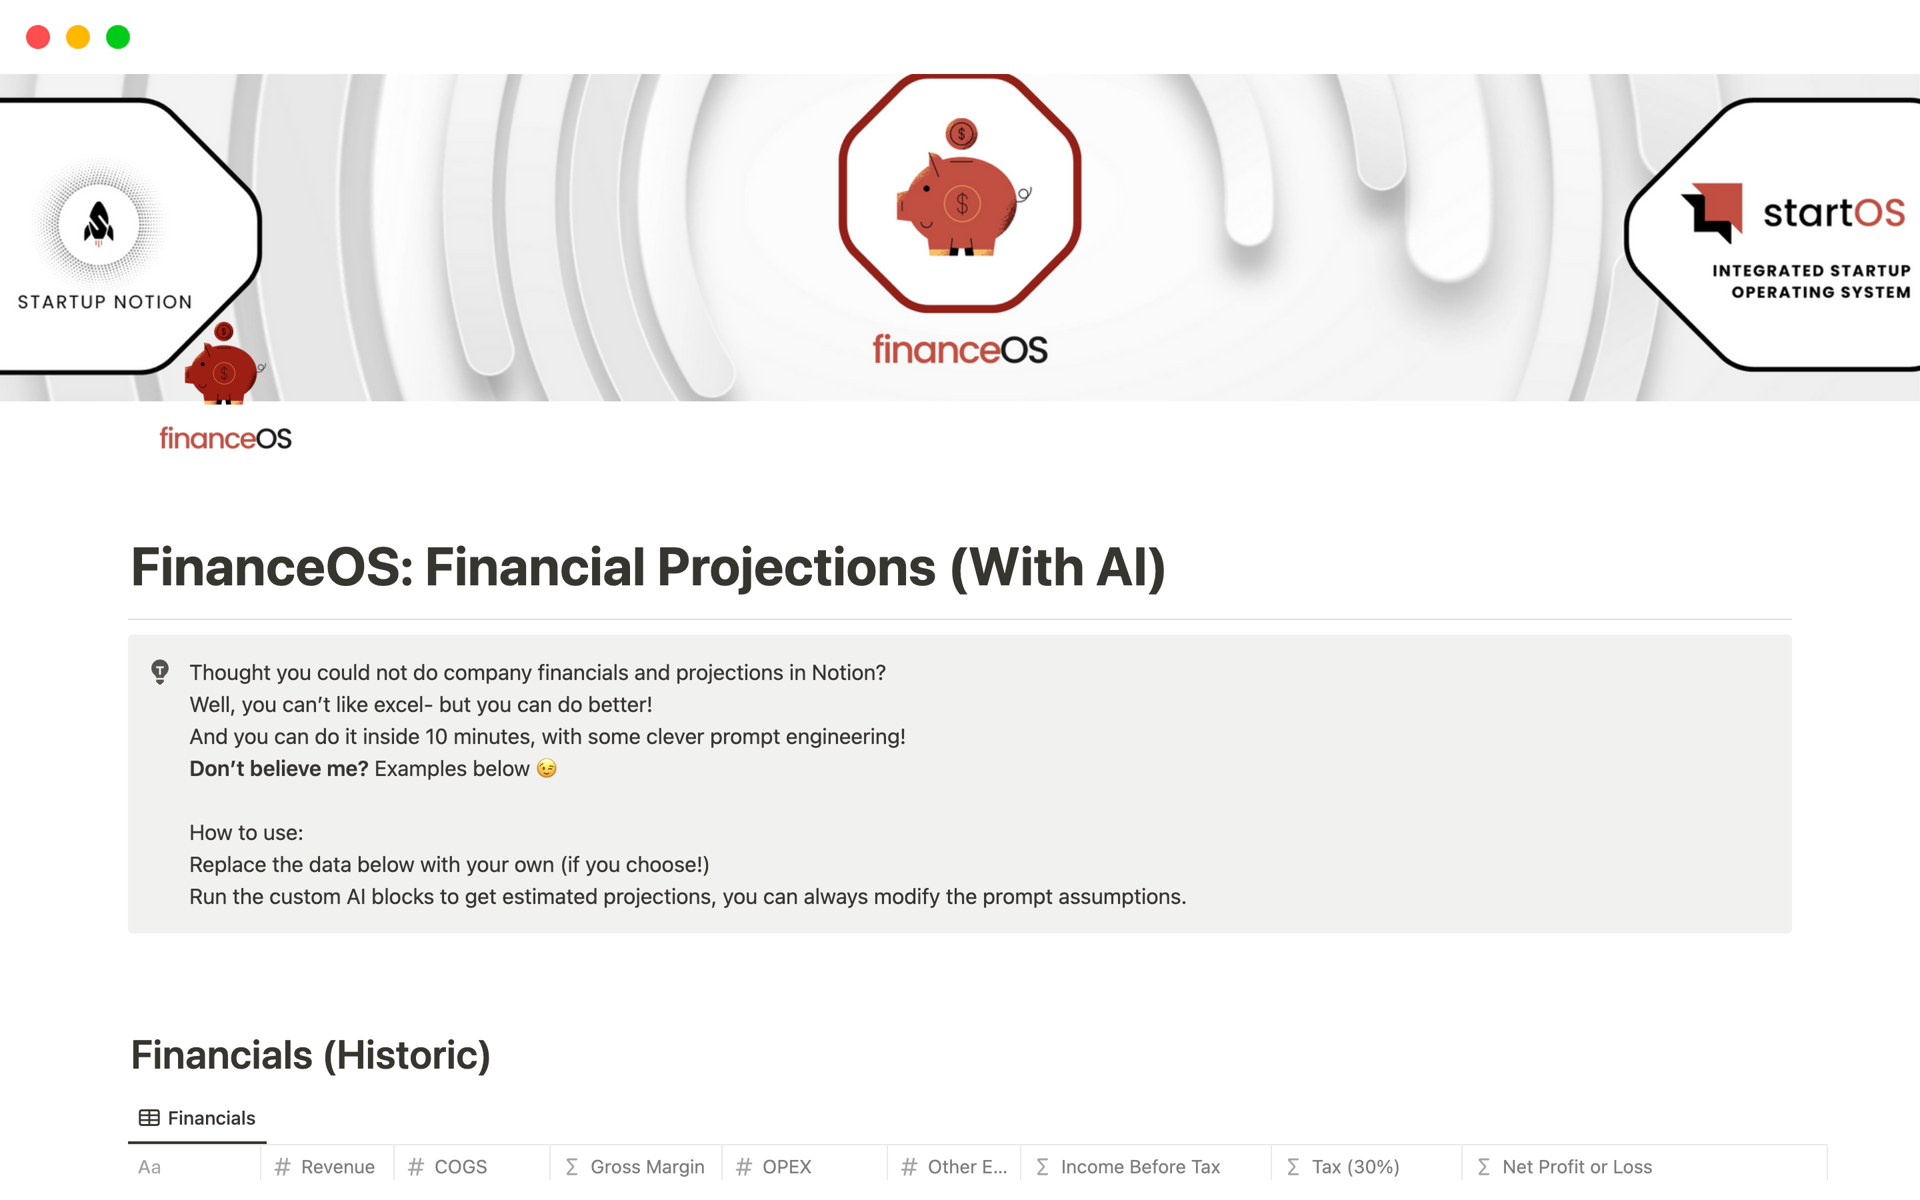 FinanceOS: Financial Projections (With AI)のテンプレートのプレビュー